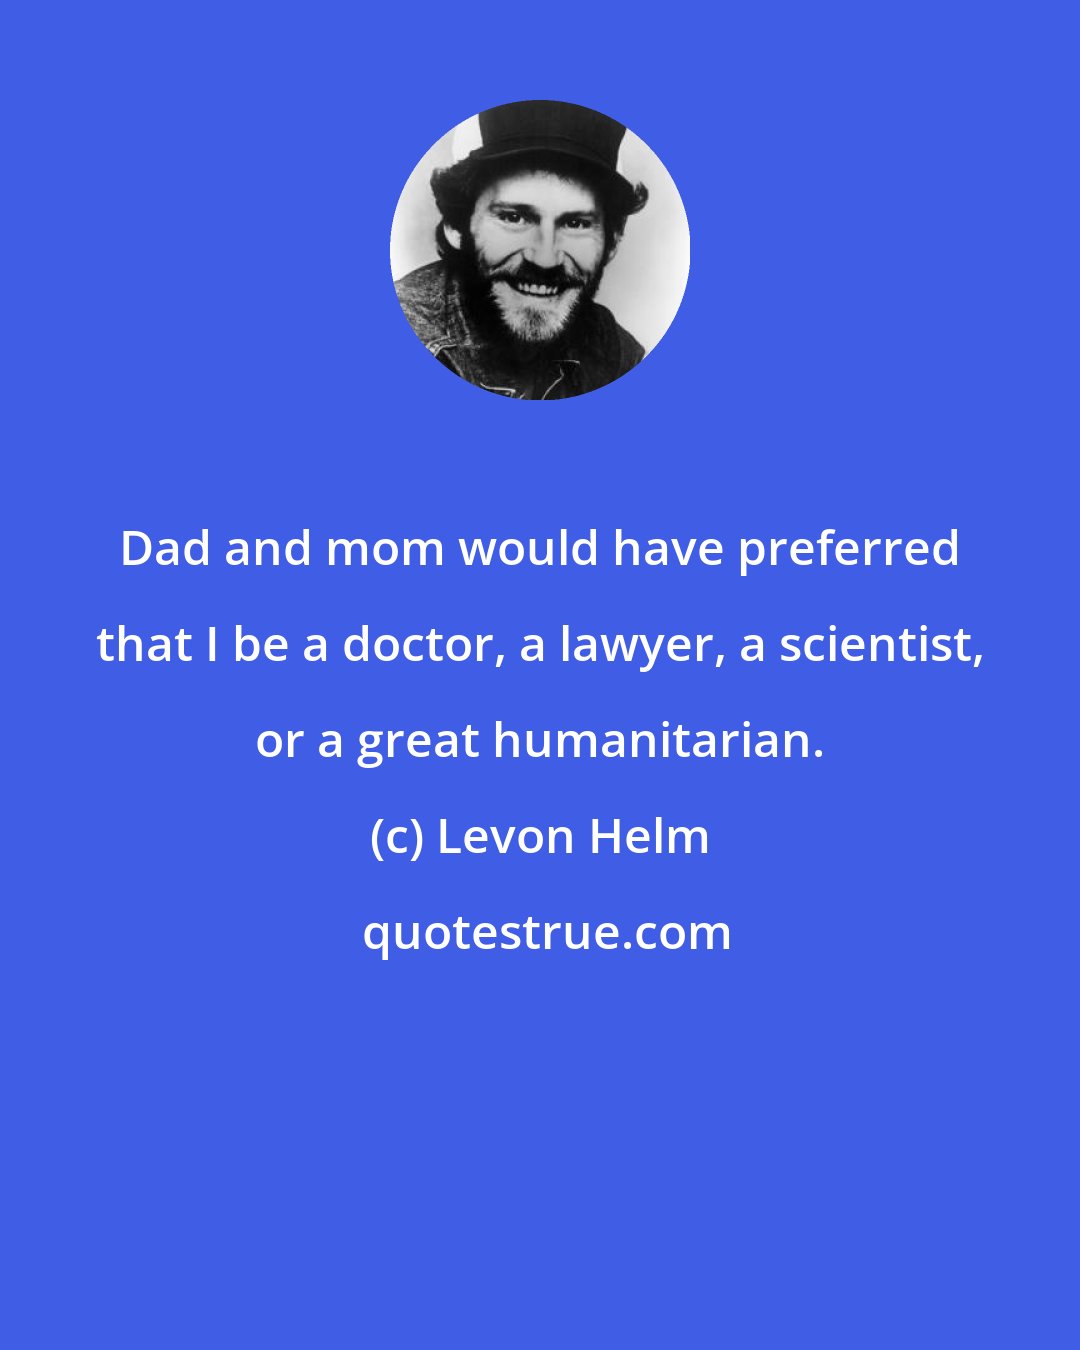 Levon Helm: Dad and mom would have preferred that I be a doctor, a lawyer, a scientist, or a great humanitarian.